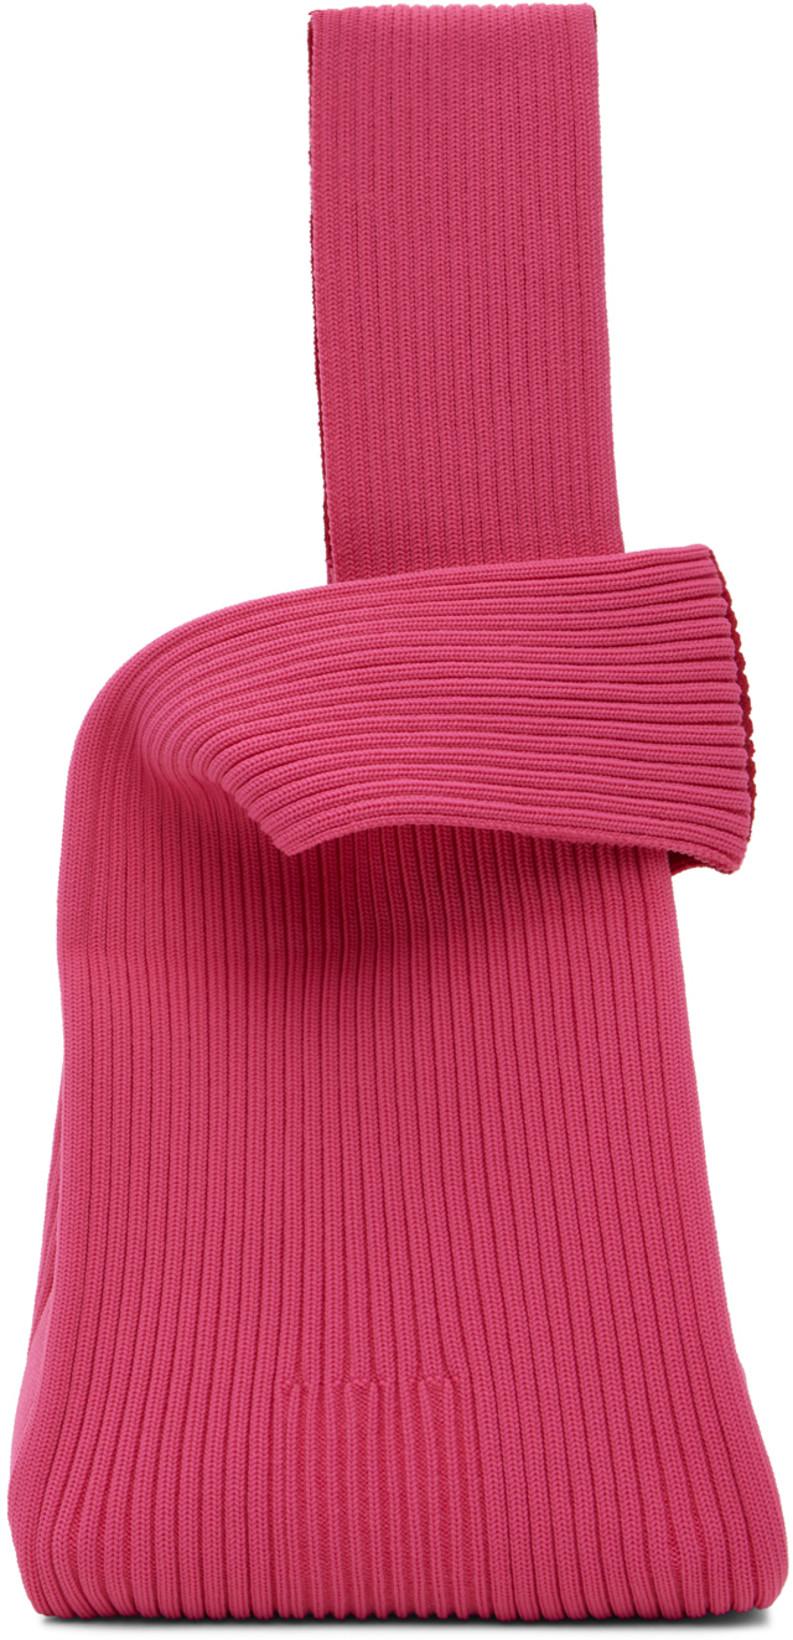 SSENSE Exclusive Pink Notched Rib Tote by CFCL